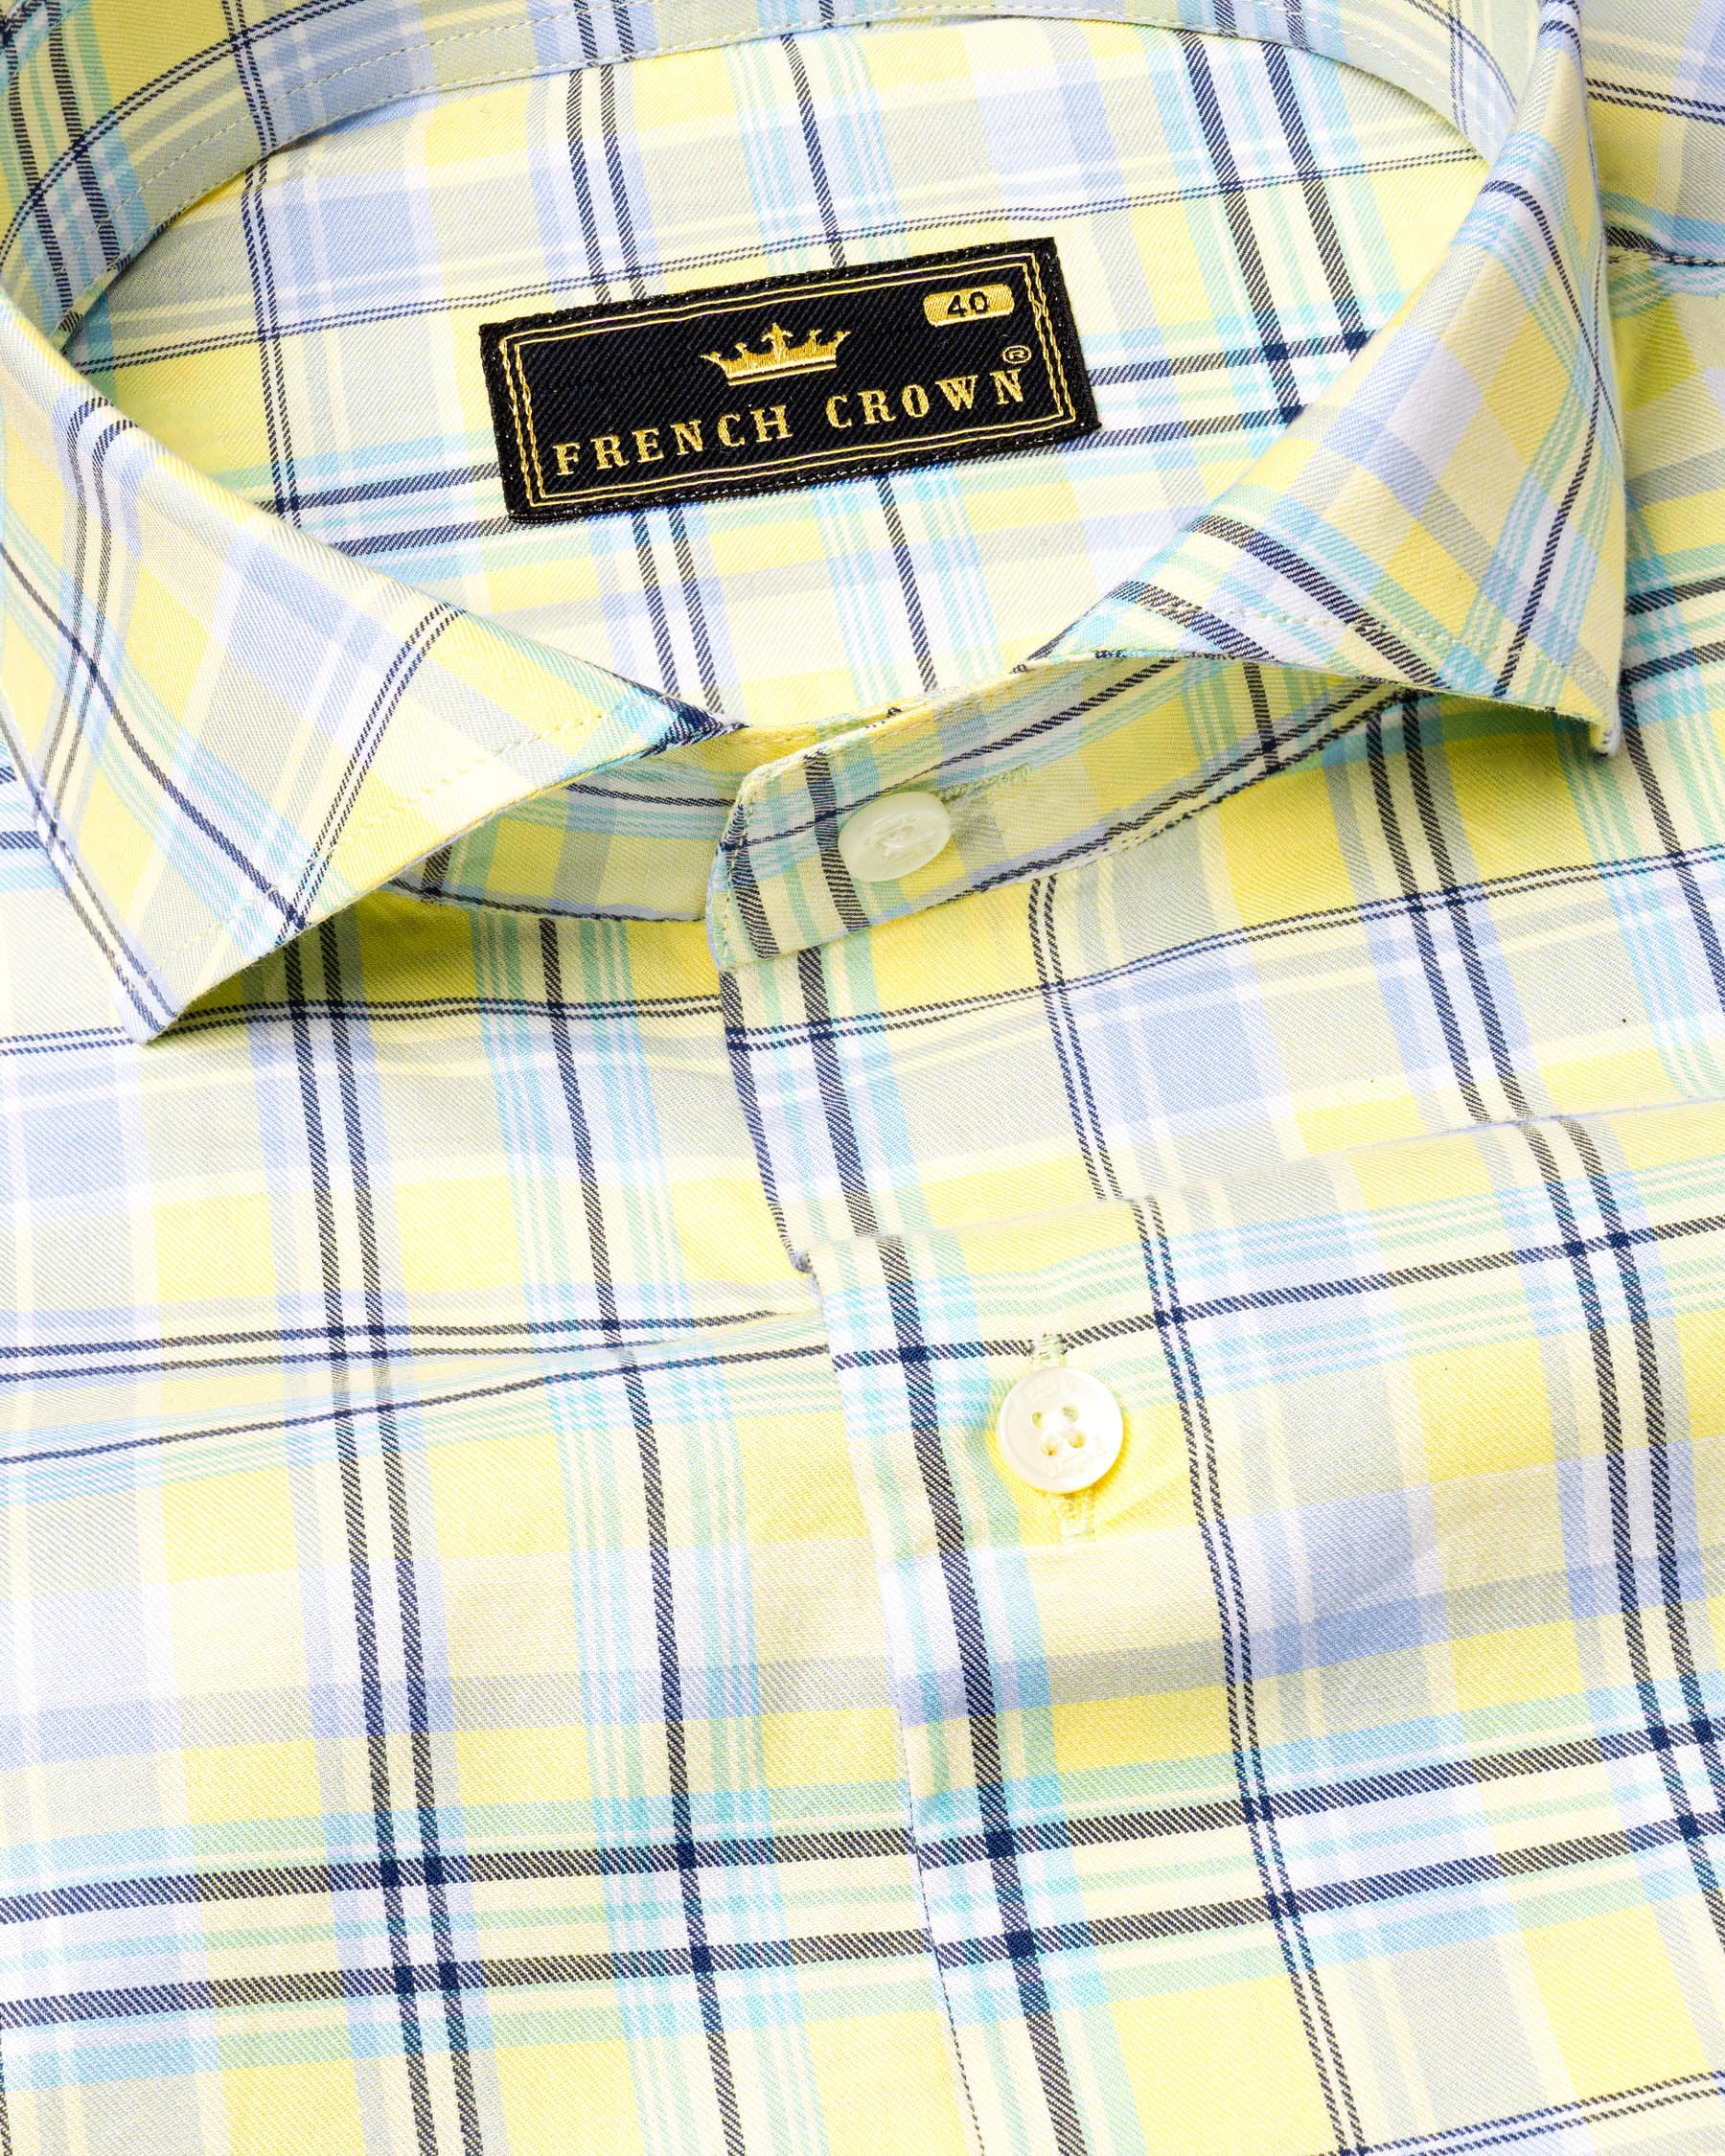 Primrose Yellow with Pale Green Twill Plaid Premium Cotton Shirt 7046-CA-38, 7046-CA-H-38, 7046-CA-39, 7046-CA-H-39, 7046-CA-40, 7046-CA-H-40, 7046-CA-42, 7046-CA-H-42, 7046-CA-44, 7046-CA-H-44, 7046-CA-46, 7046-CA-H-46, 7046-CA-48, 7046-CA-H-48, 7046-CA-50, 7046-CA-H-50, 7046-CA-52, 7046-CA-H-52